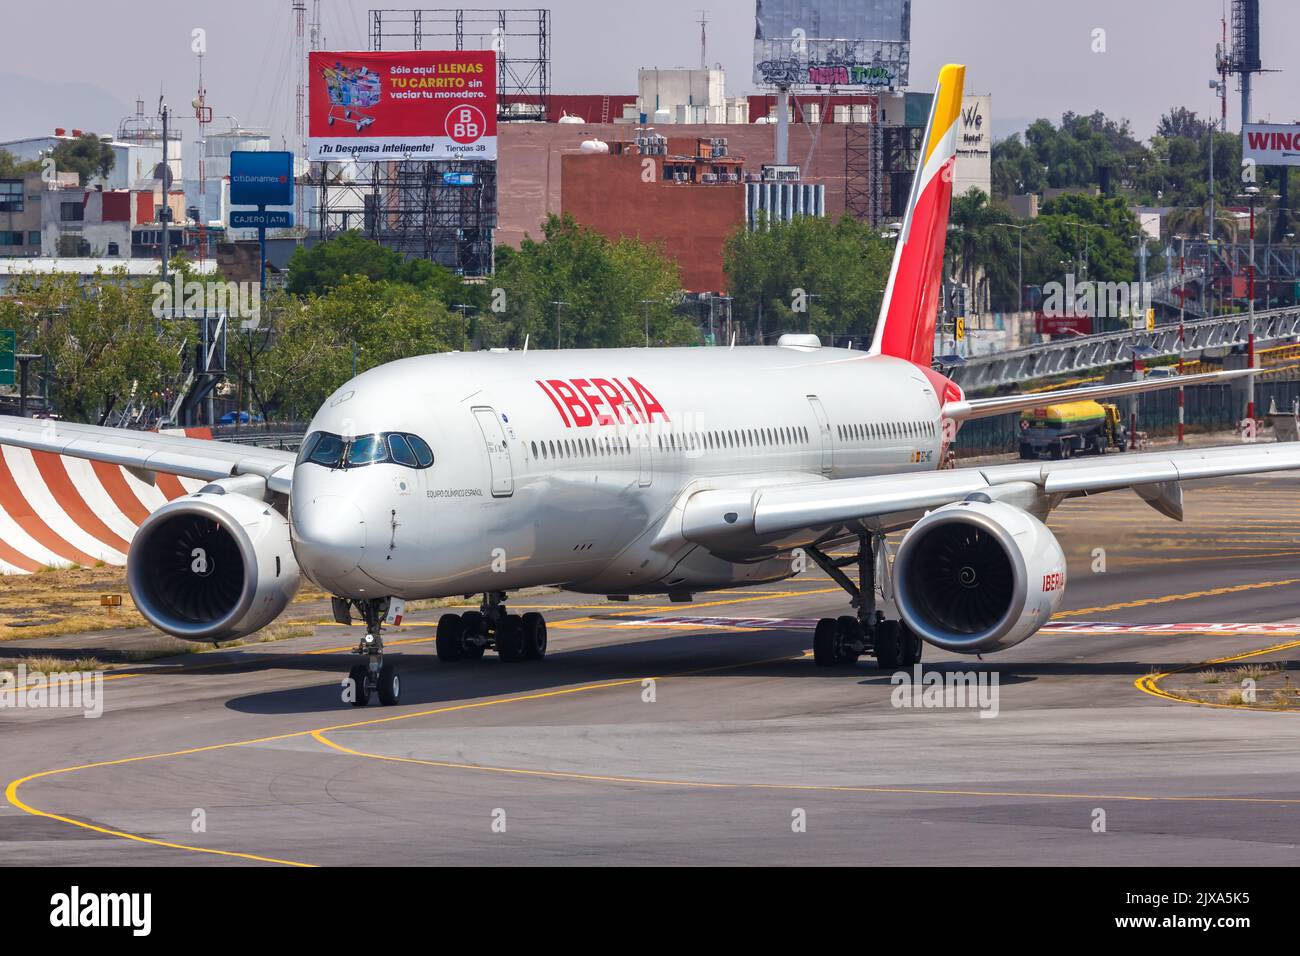 Mexico City, Mexico - April 14, 2022: Iberia Airbus A350-900 airplane at Mexico City airport (MEX) in Mexico. Stock Photo